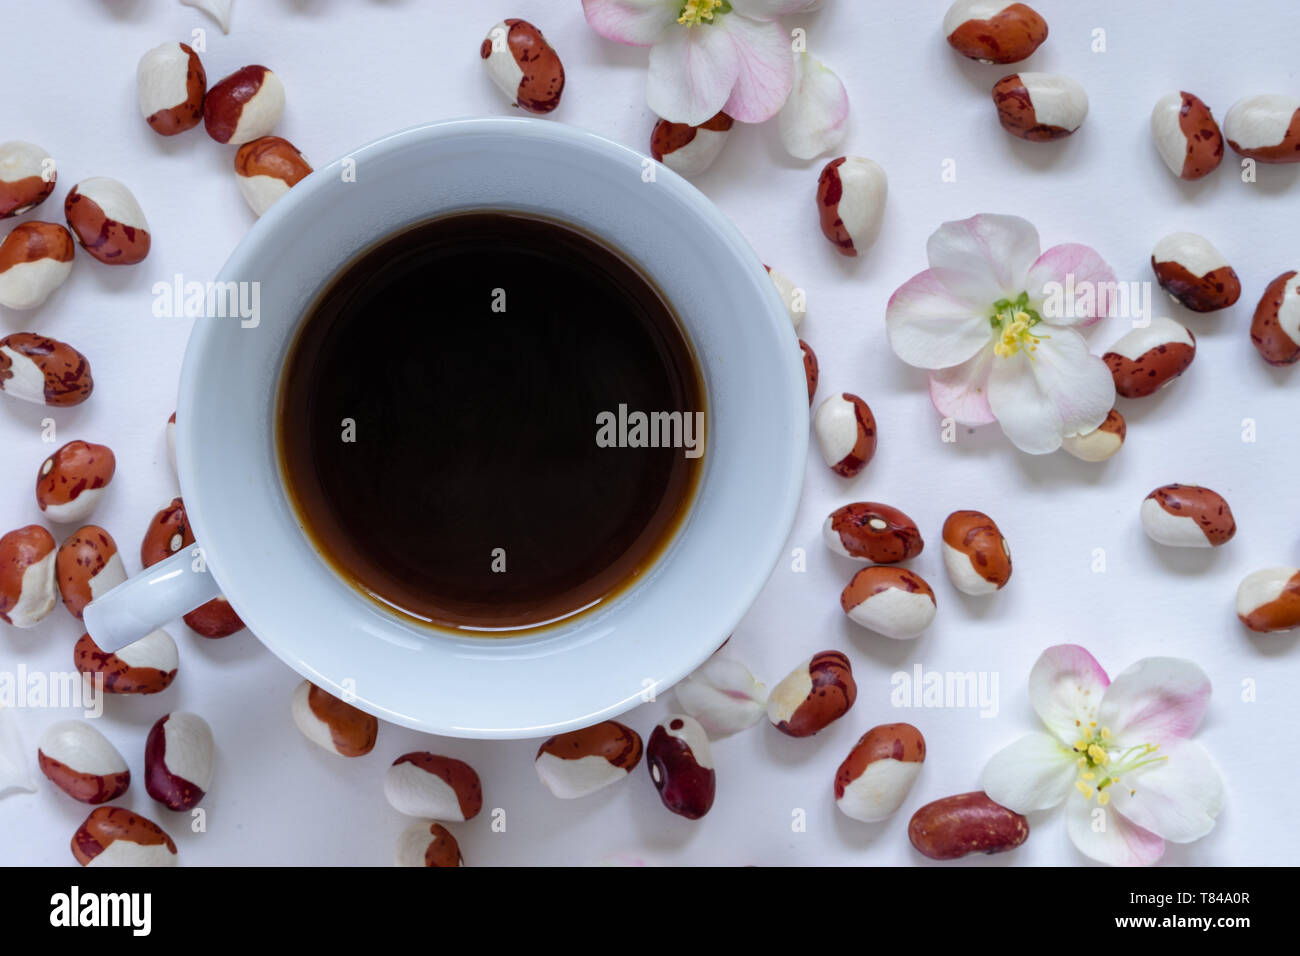 Cup of hot coffee with colorful beans, Phaseolus vulgaris,  and apple blossoms, Malus, on the table. Flat lay, top view. Stock Photo